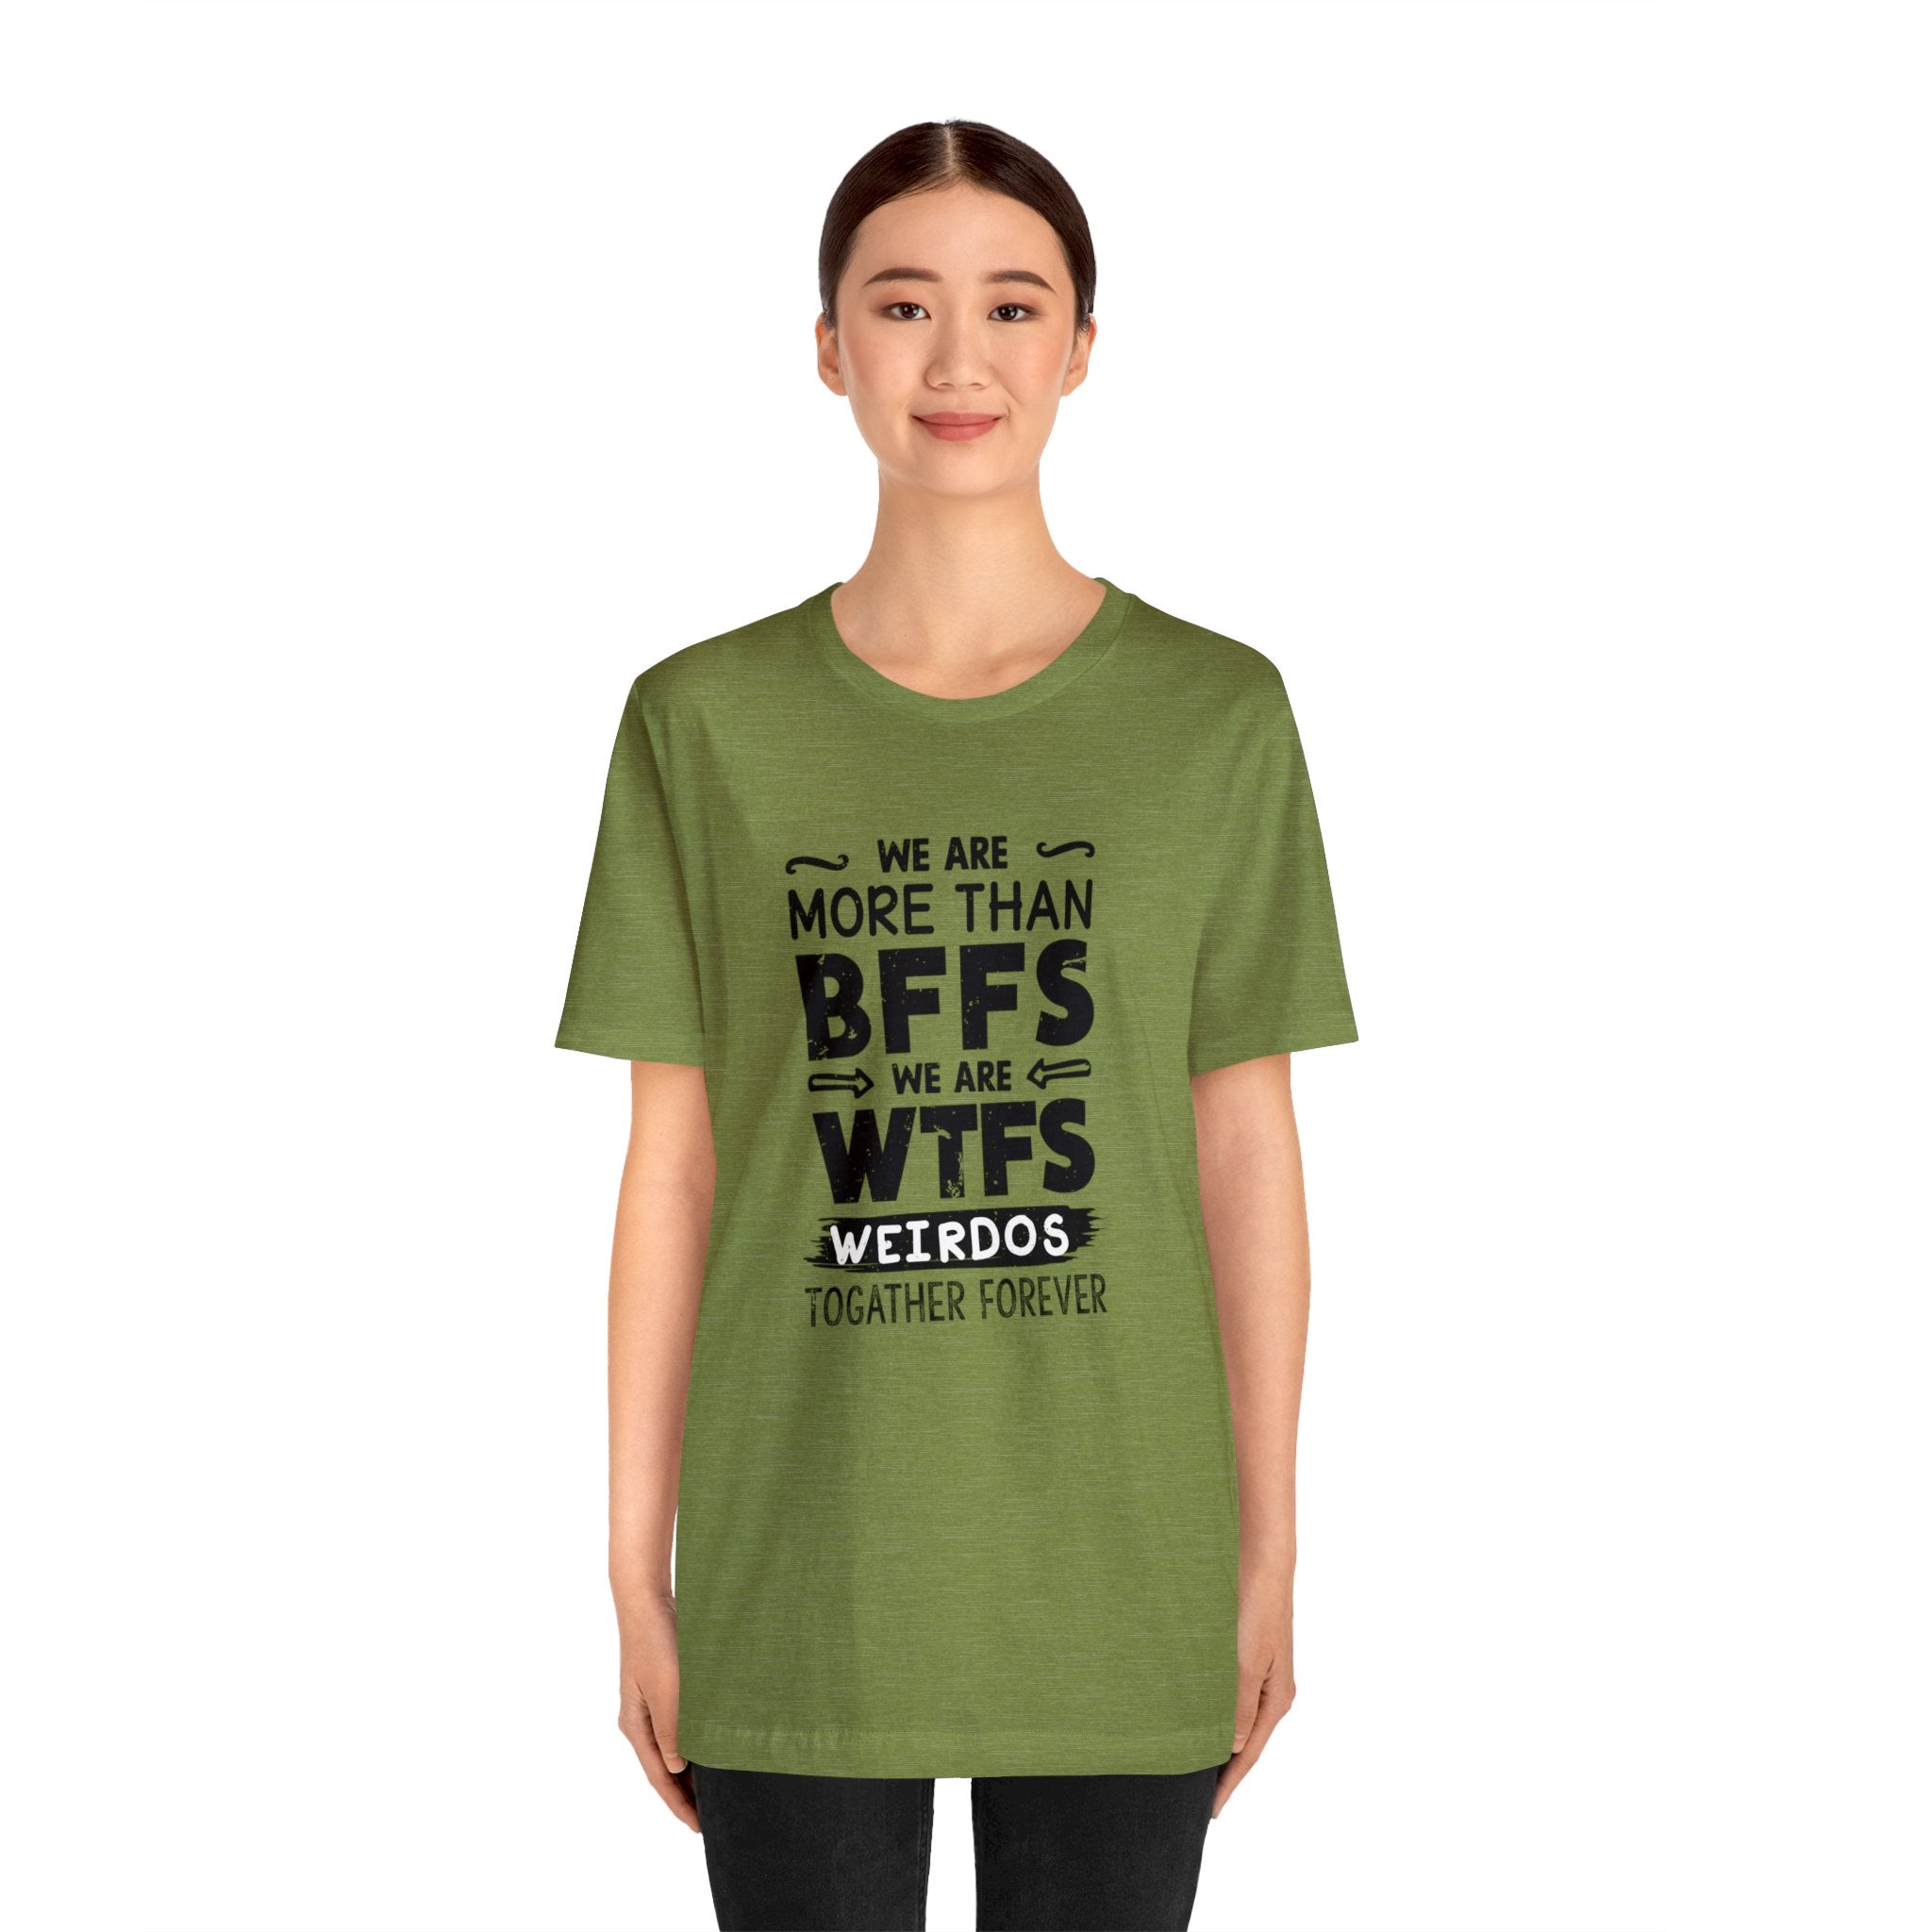 Today, a woman wearing a green unisex We Are More T-Shirt placed an order for bfftws printed on it.